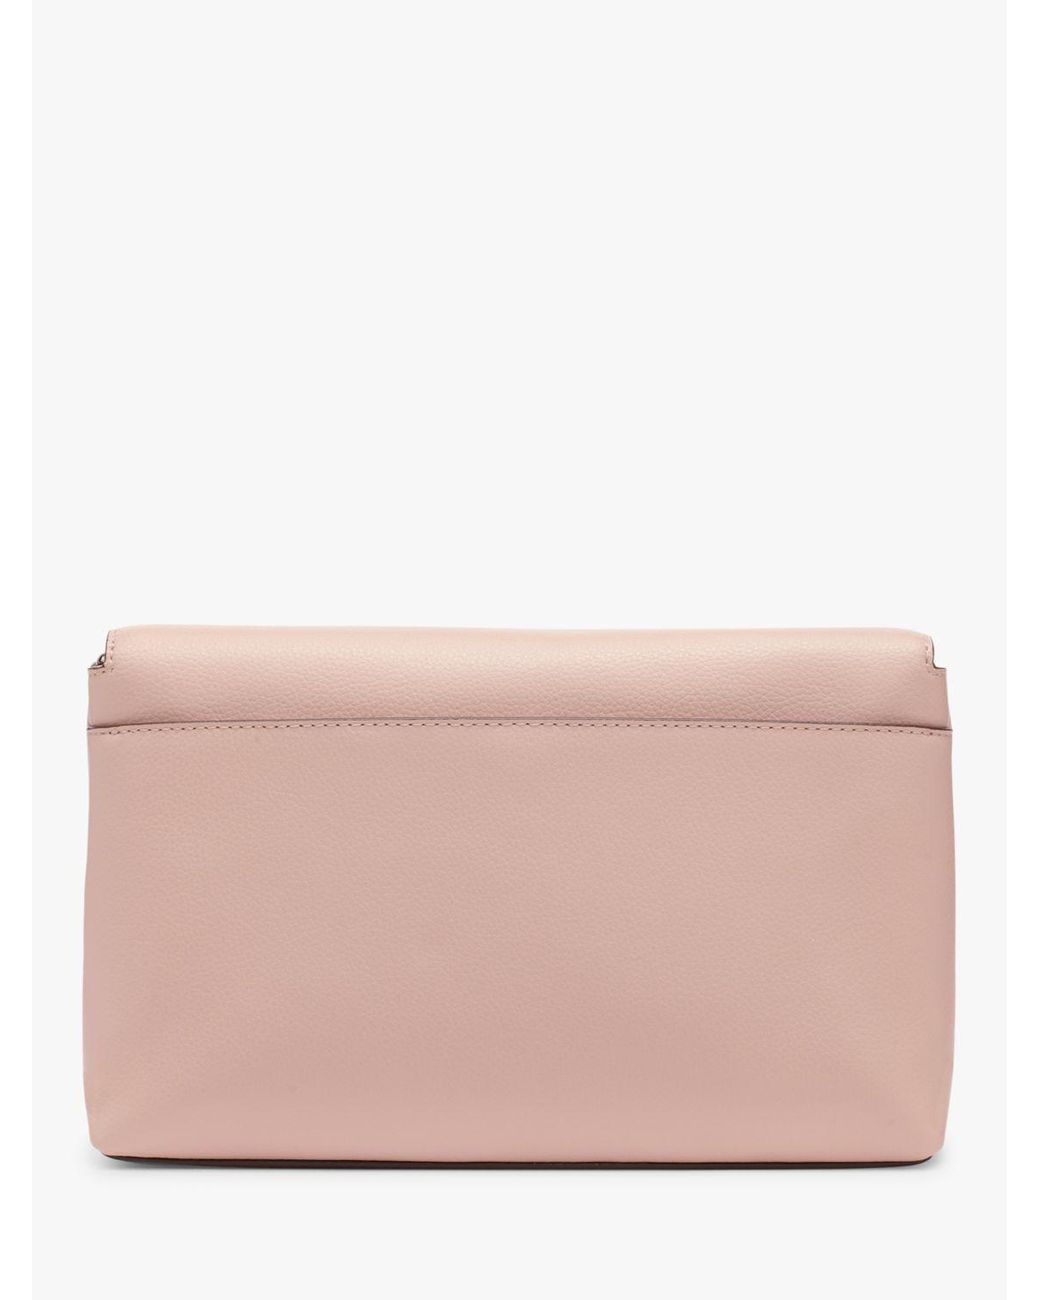 DKNY Elissa Leather Chain Strap Clutch Bag in Pink | Lyst UK